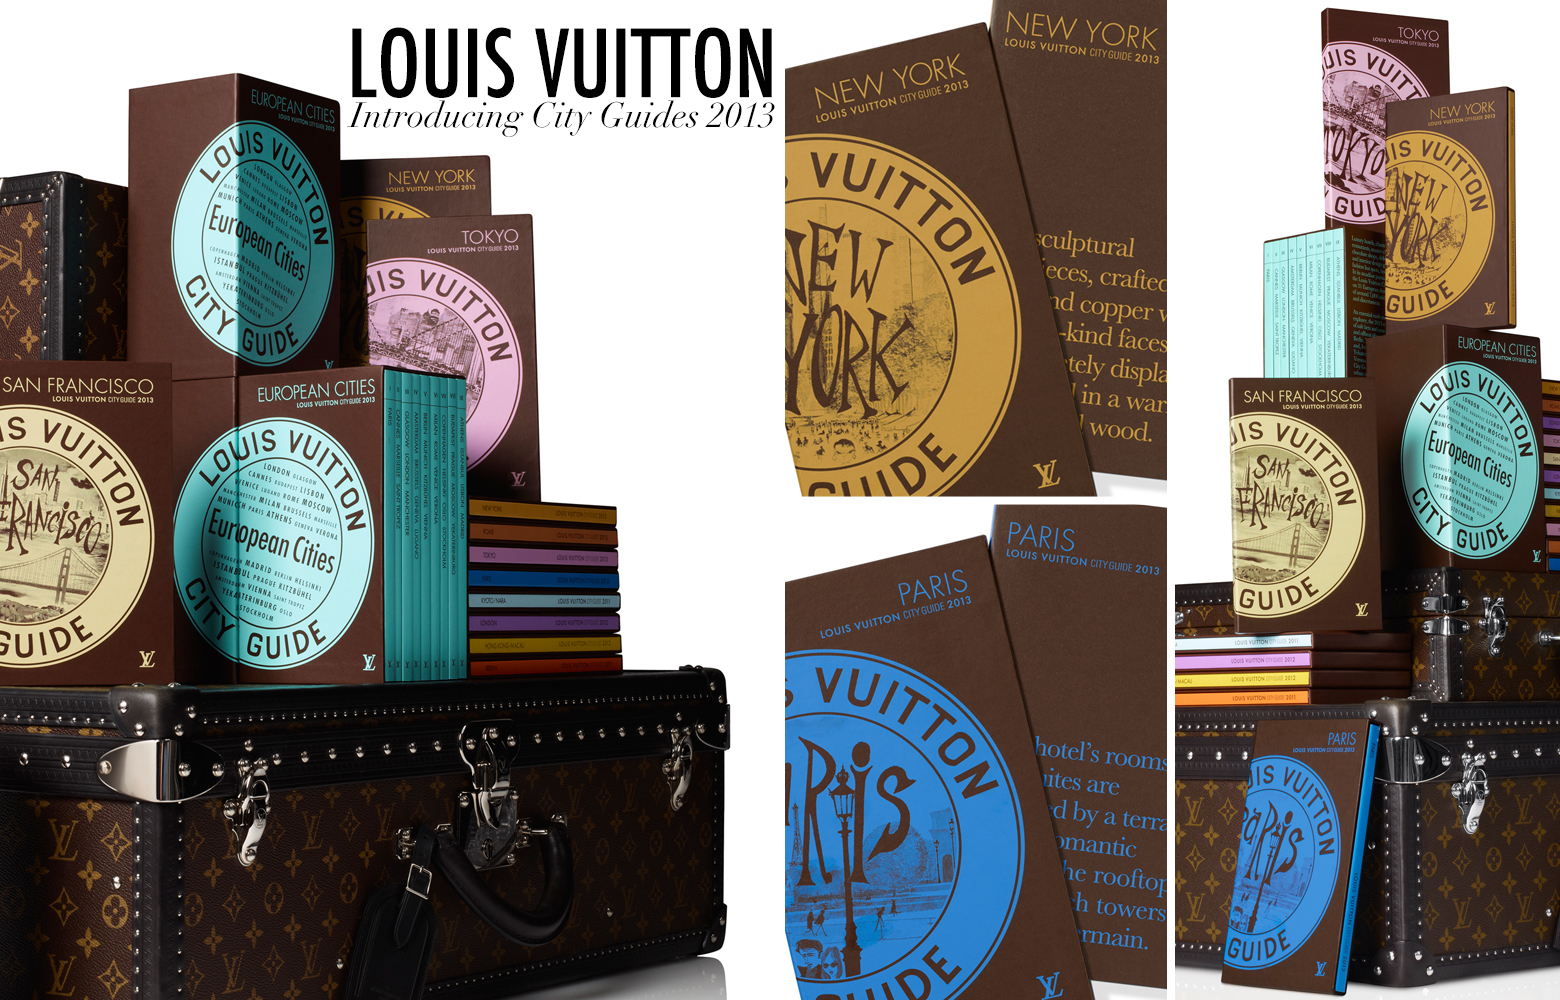 Louis Vuitton' First Edition City Guide - Ruby Lane